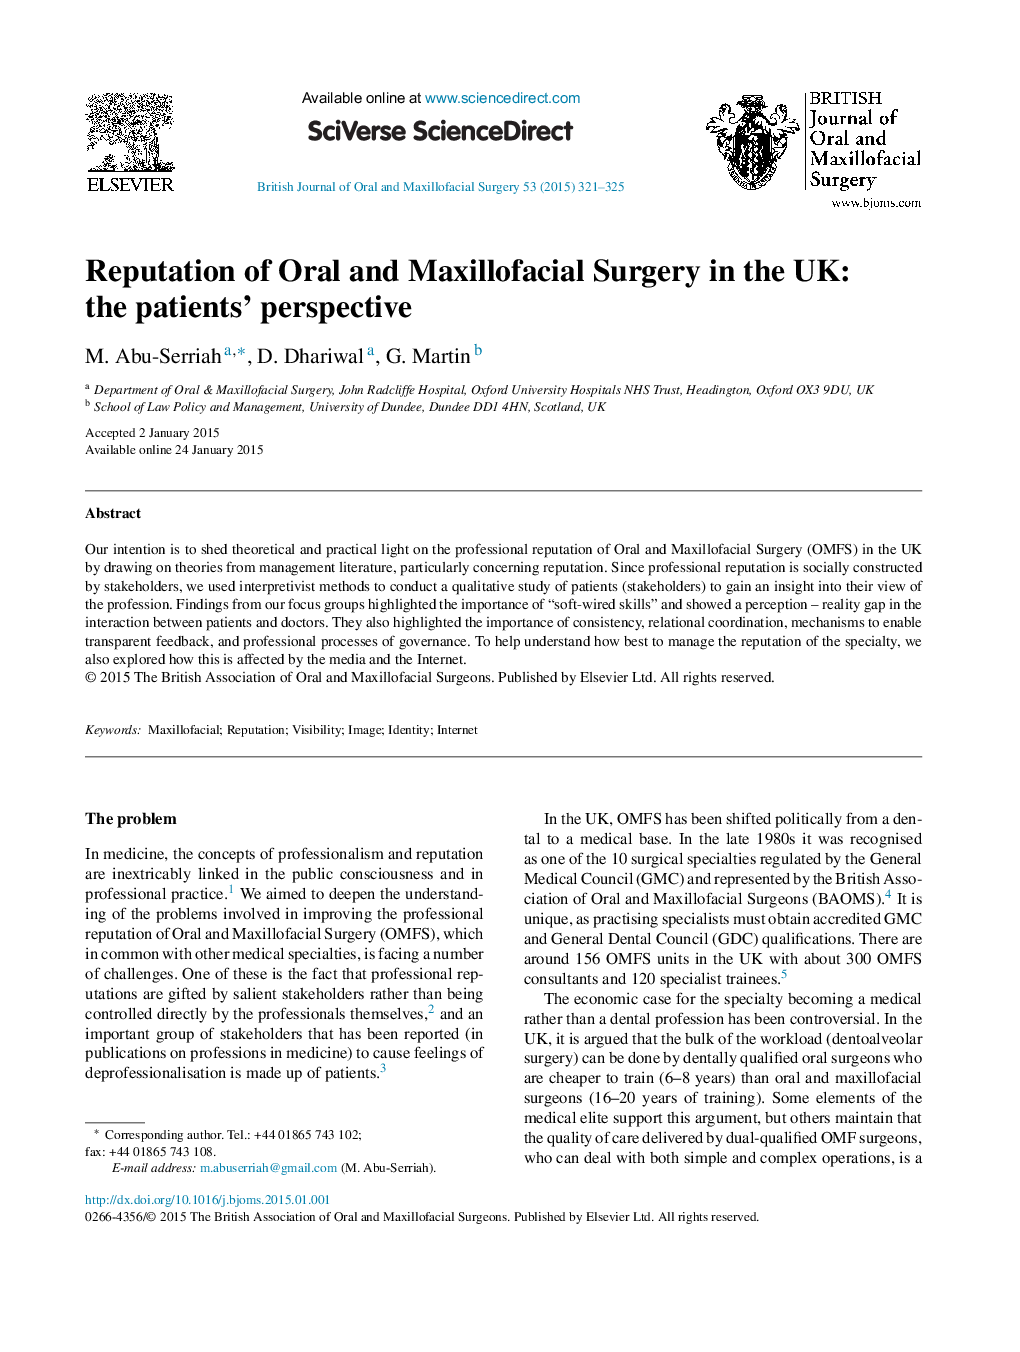 Reputation of Oral and Maxillofacial Surgery in the UK: the patients’ perspective